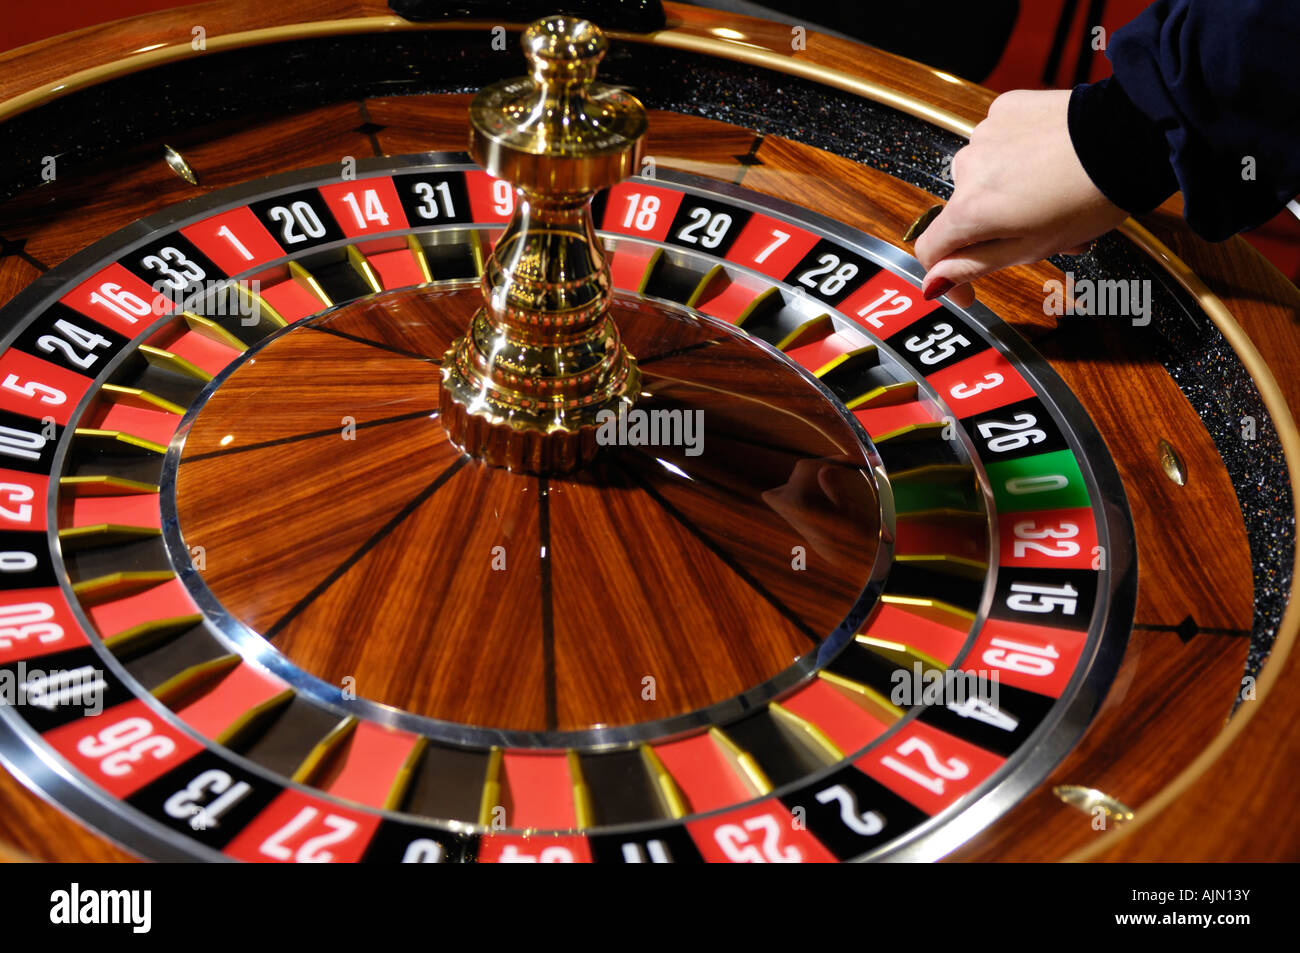 how long does a roulette spin take?